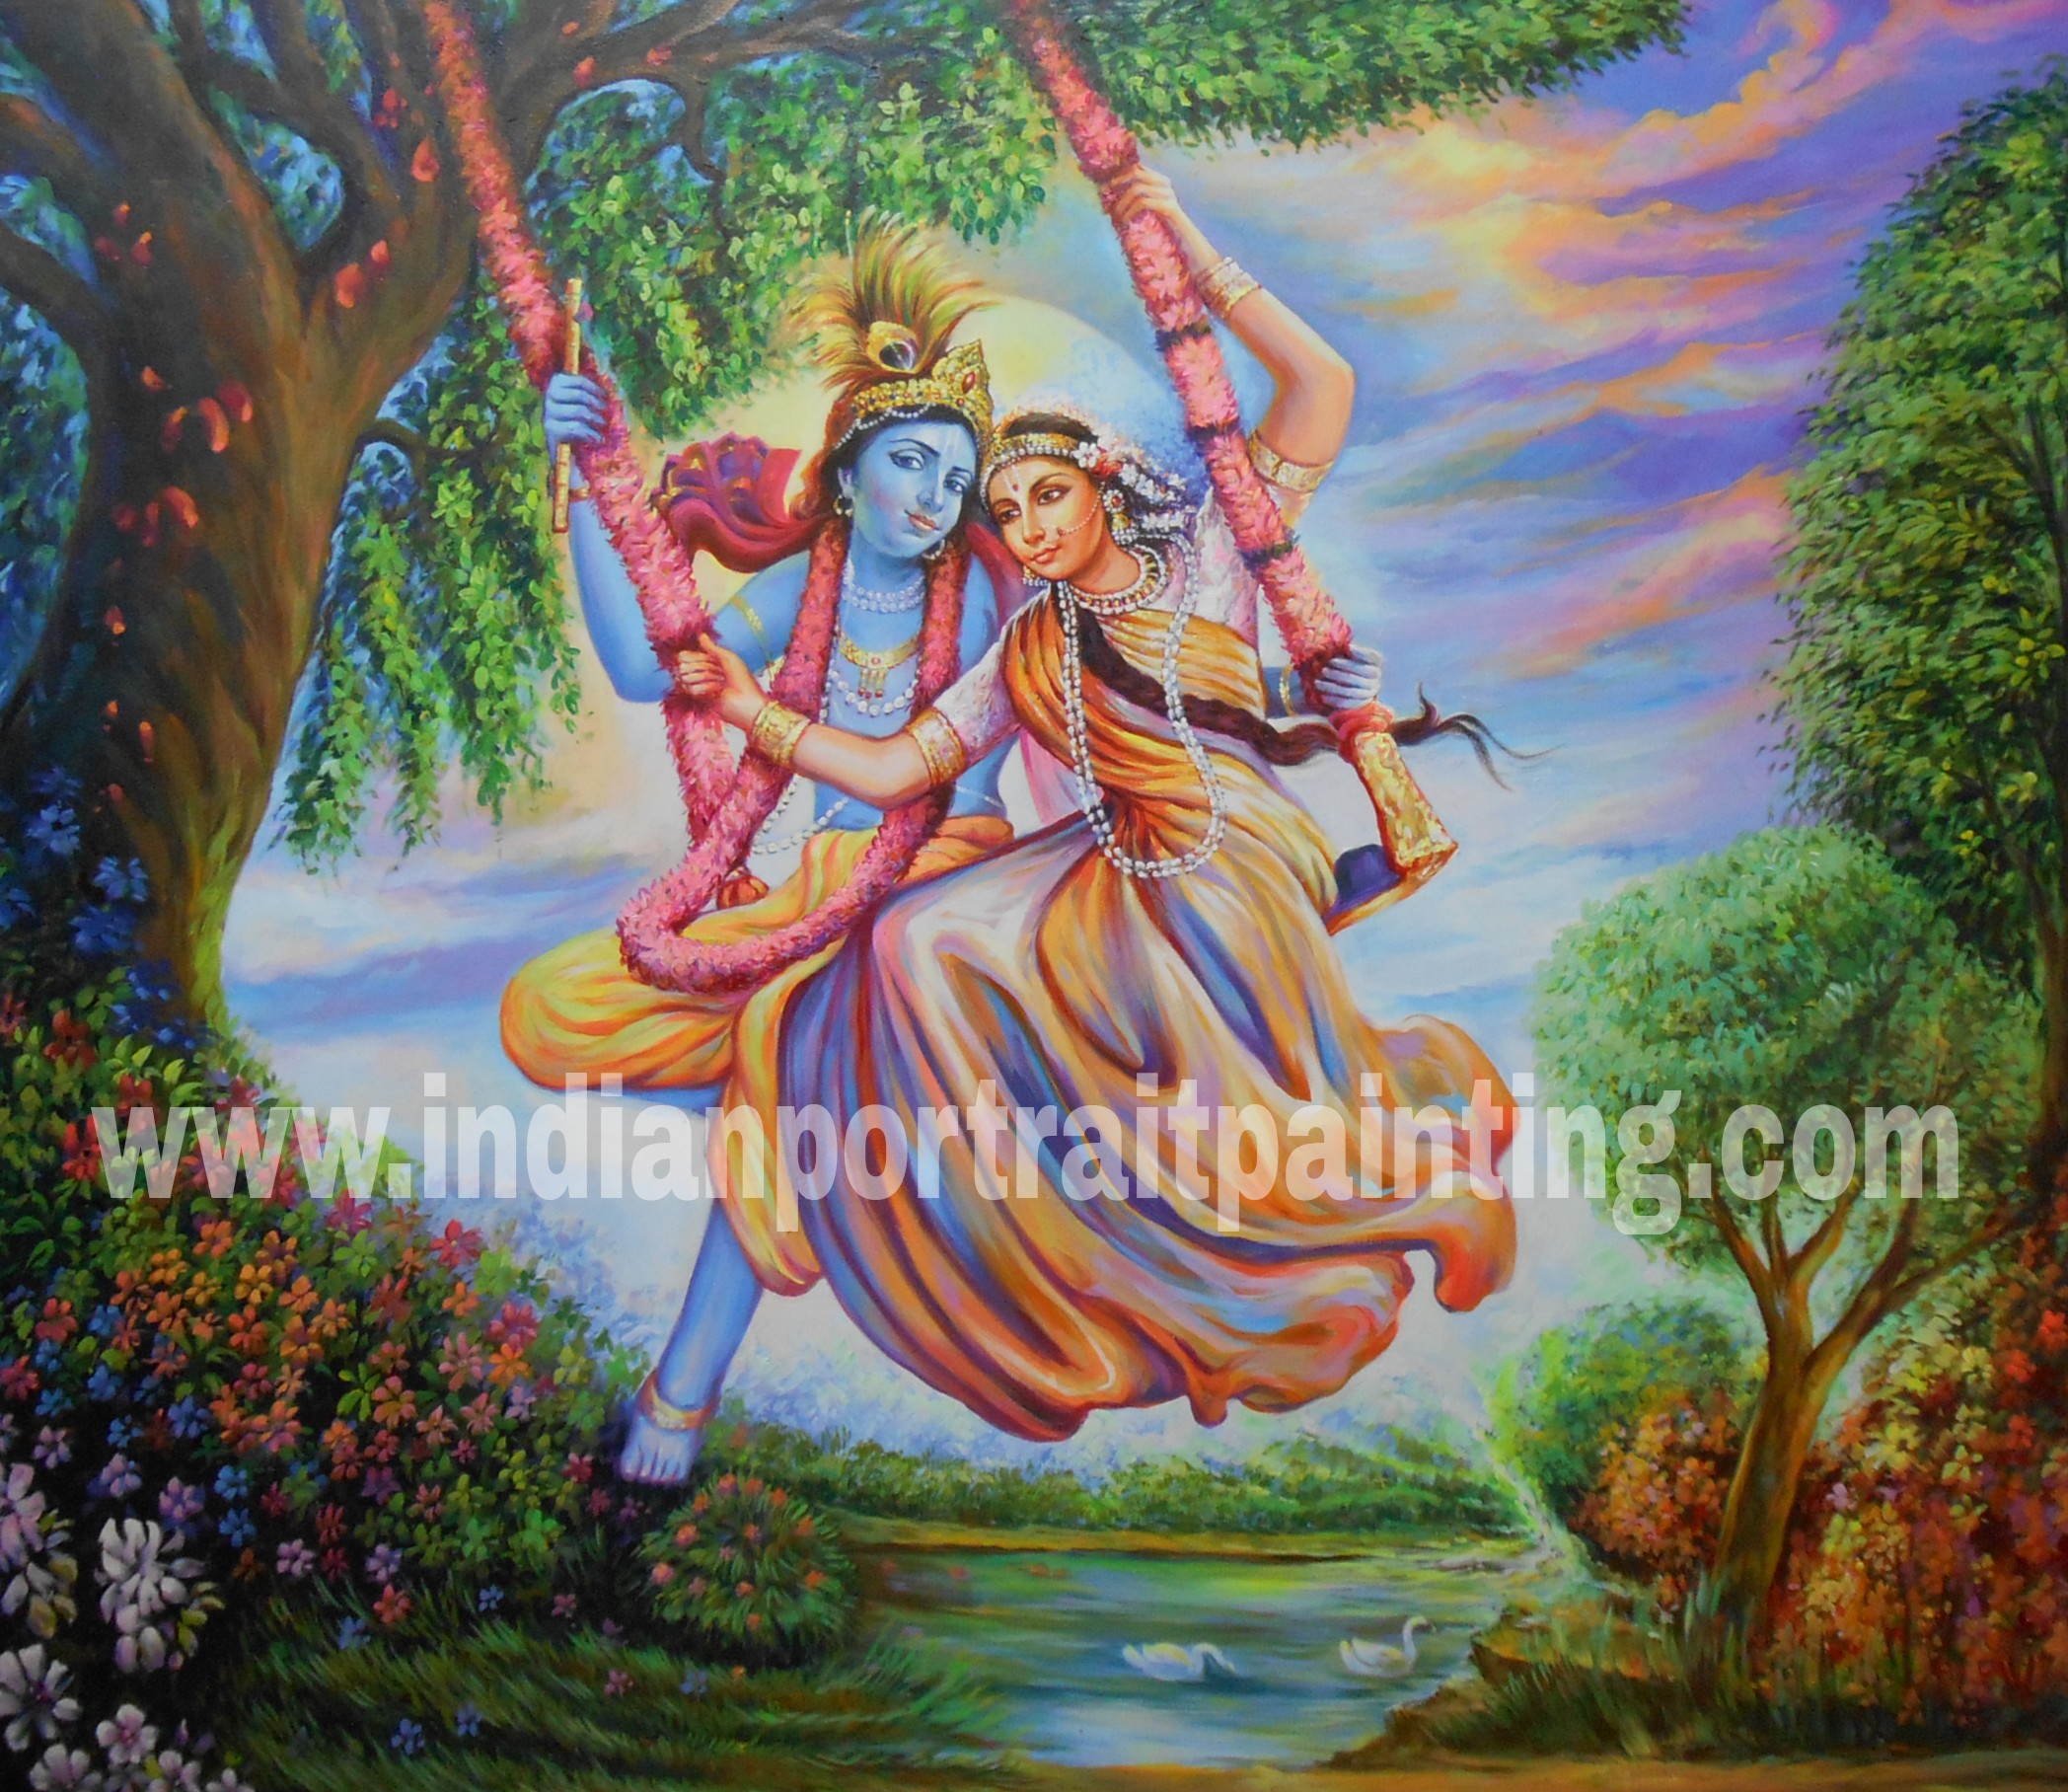 Radha krishna on swing - Best hand painted painters reproduction on canvas